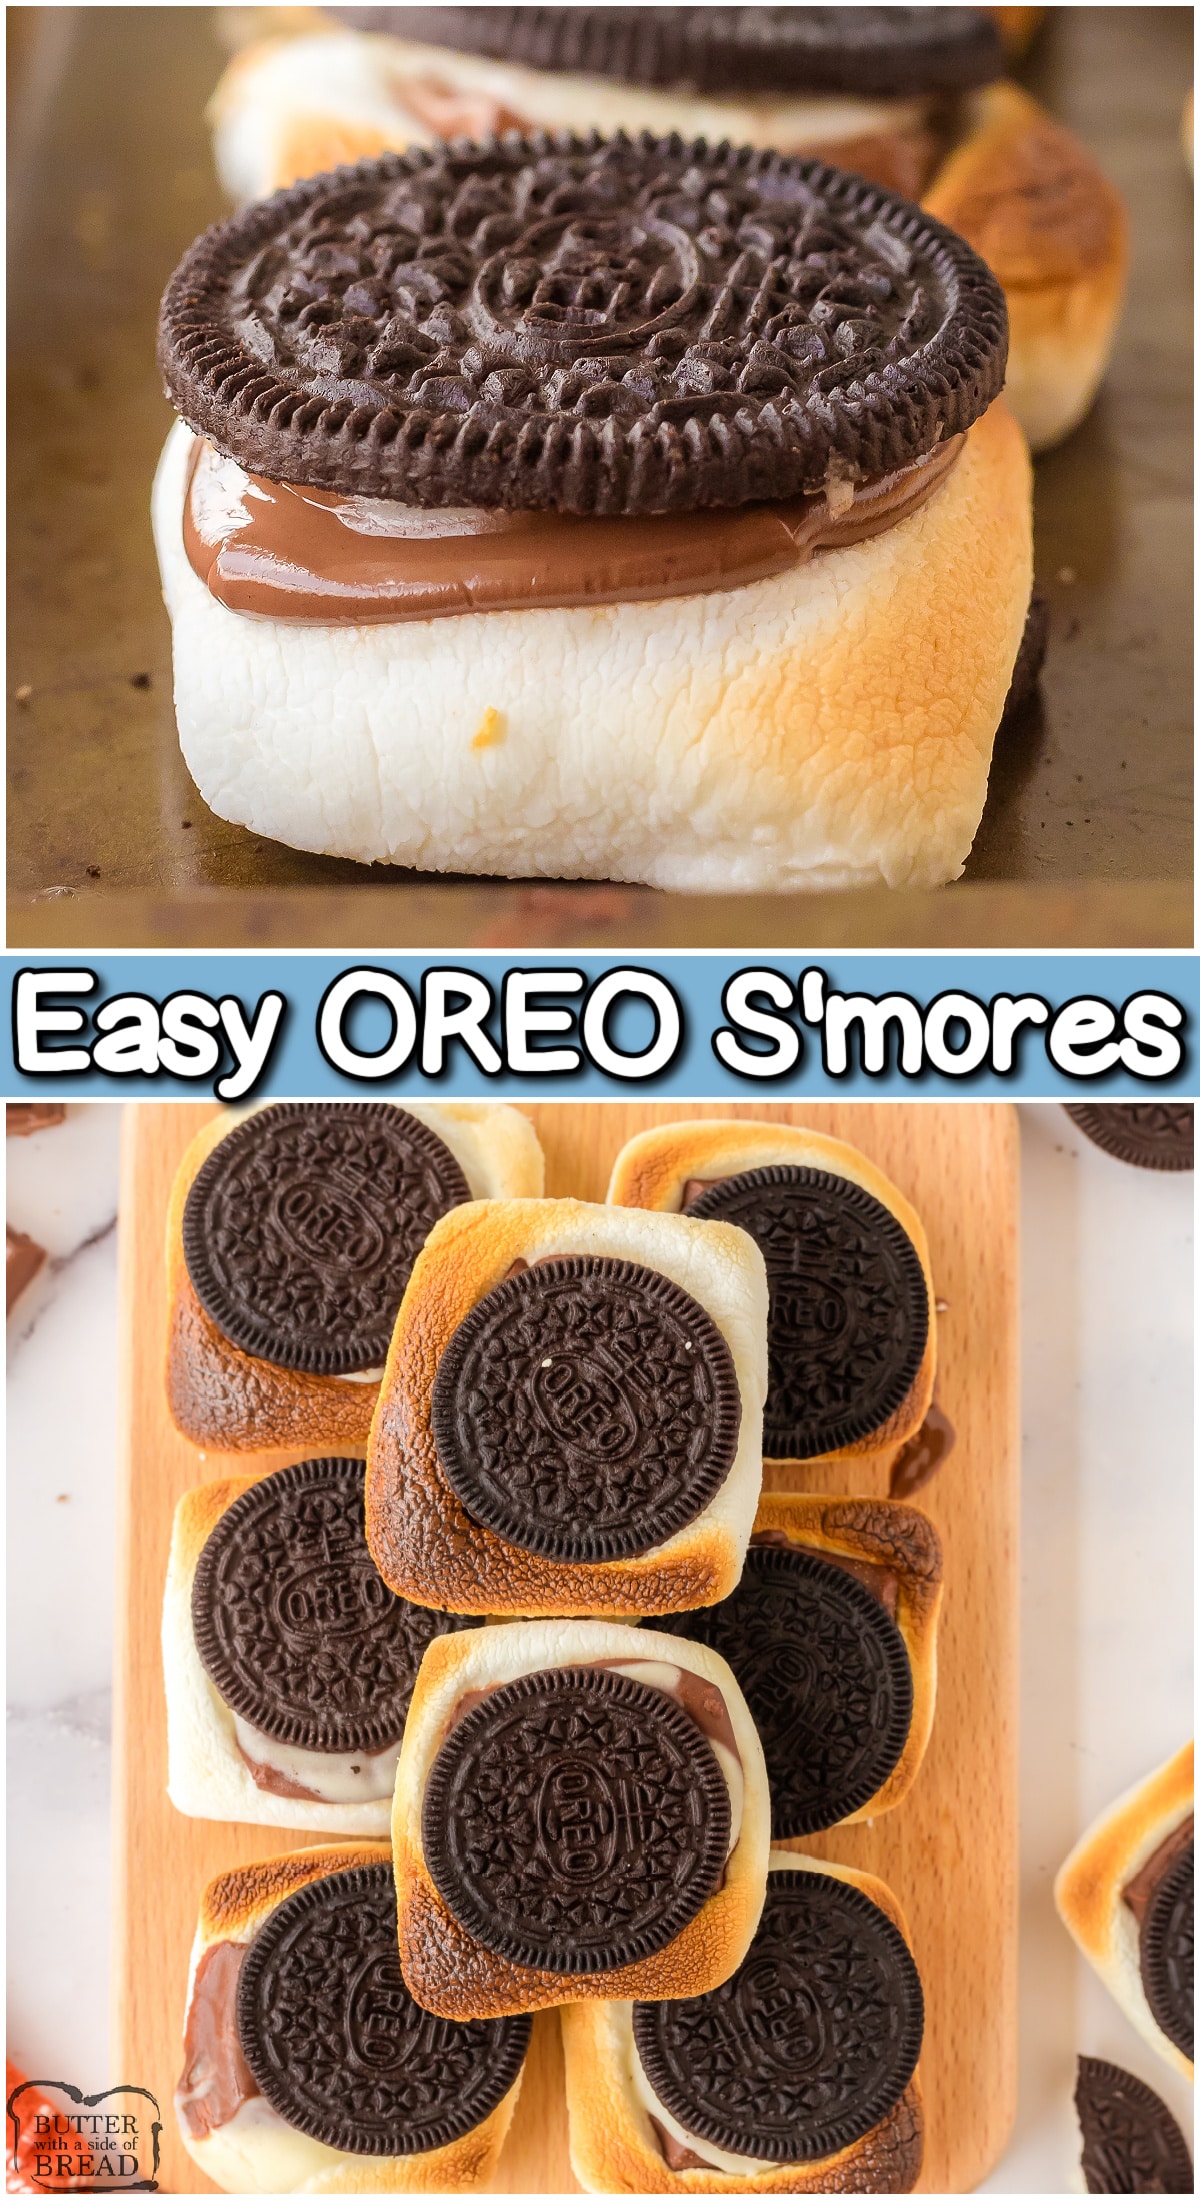 Oreo S'mores made easy in the oven! Two classic treats combine in this ooey, gooey chocolatey cookie. It'll be your new favorite summer sweet! 